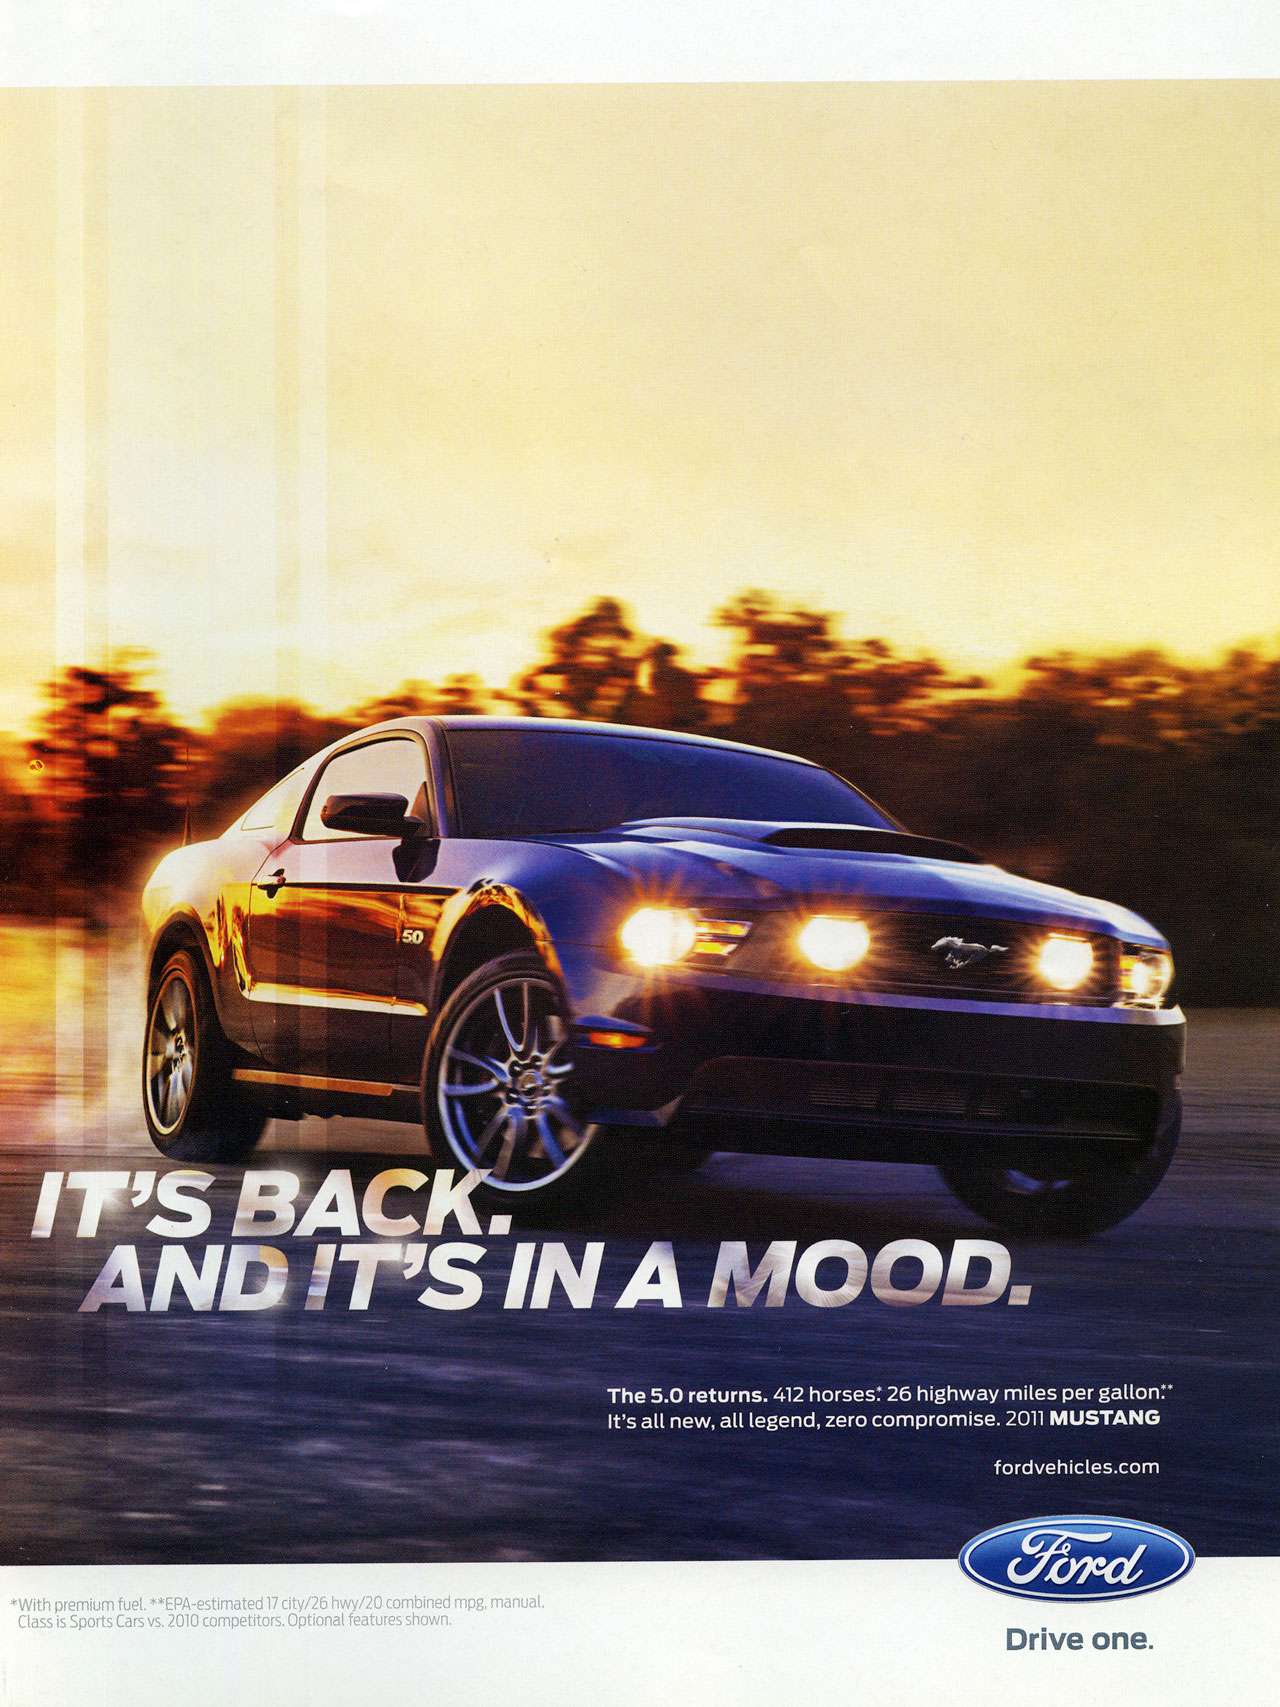 It's back. And it's in a mood. The 2011 Ford Mustang 5.0 returns. The 5.0 returns. 412 horses: 26 highway miles per gallon. It's all new, all legend, zero compromise. 2011 MUSTANG